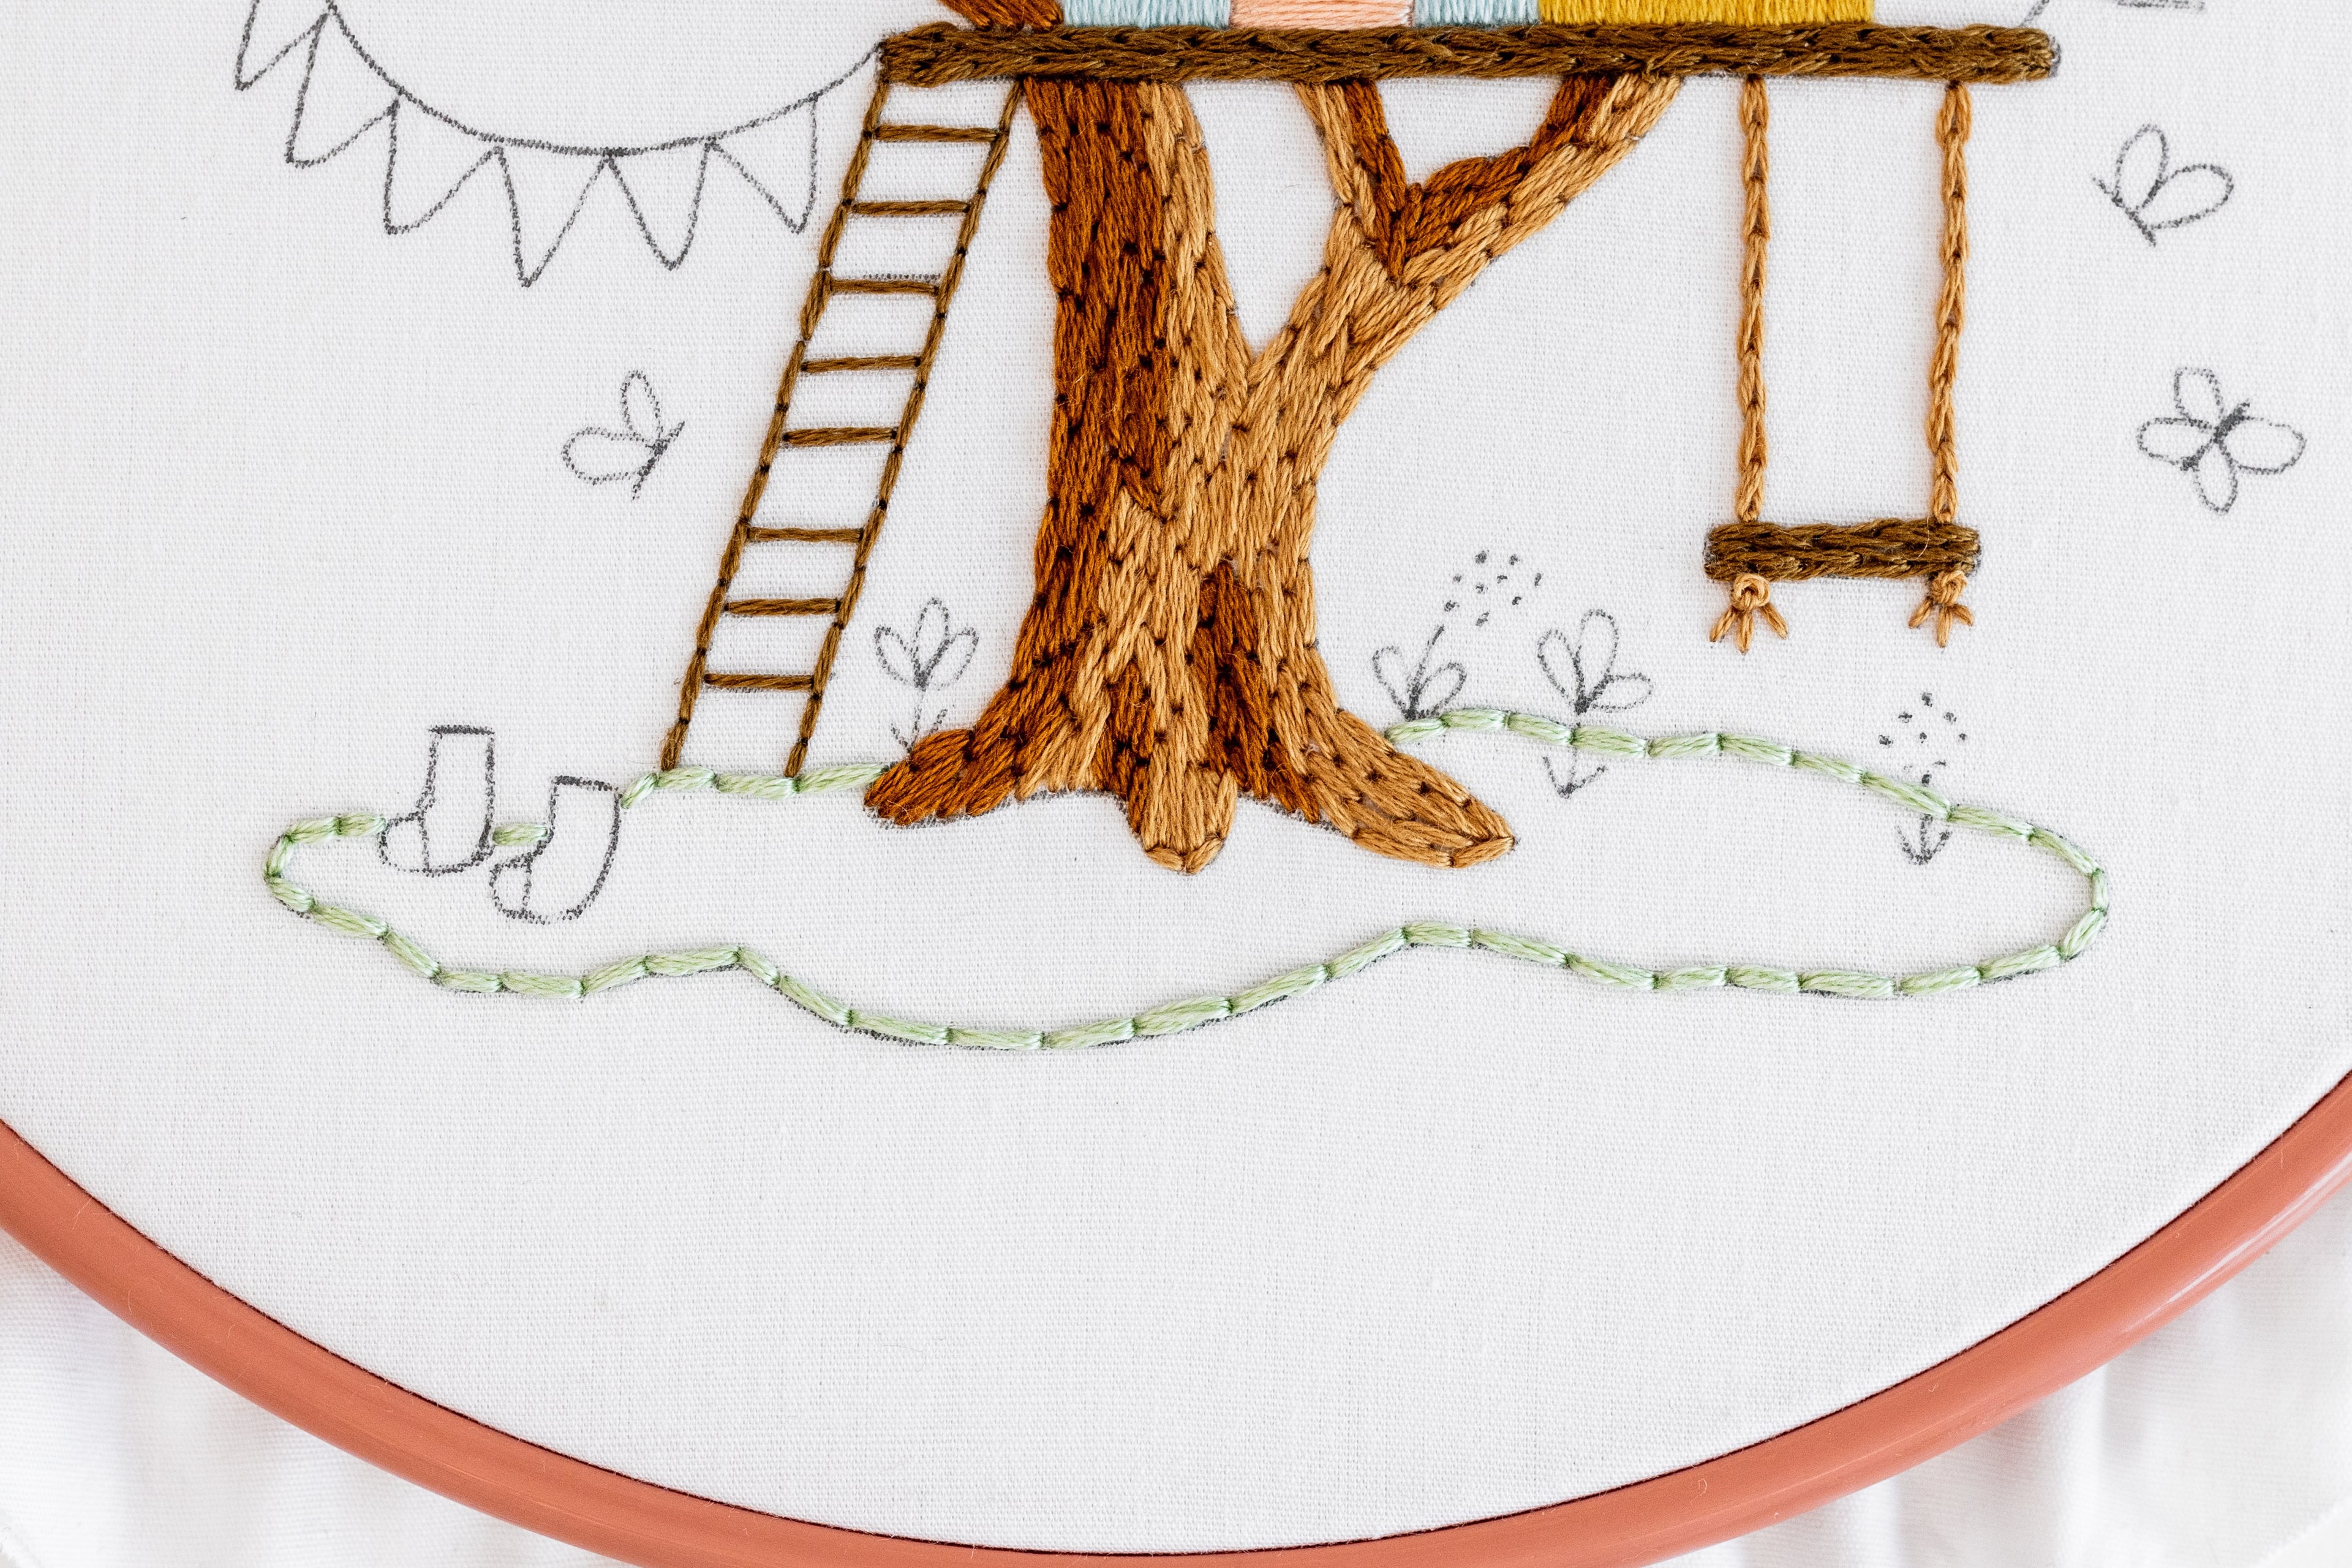 This is an image of a stitched outline in The Treehouse pattern by Clever Poppy.